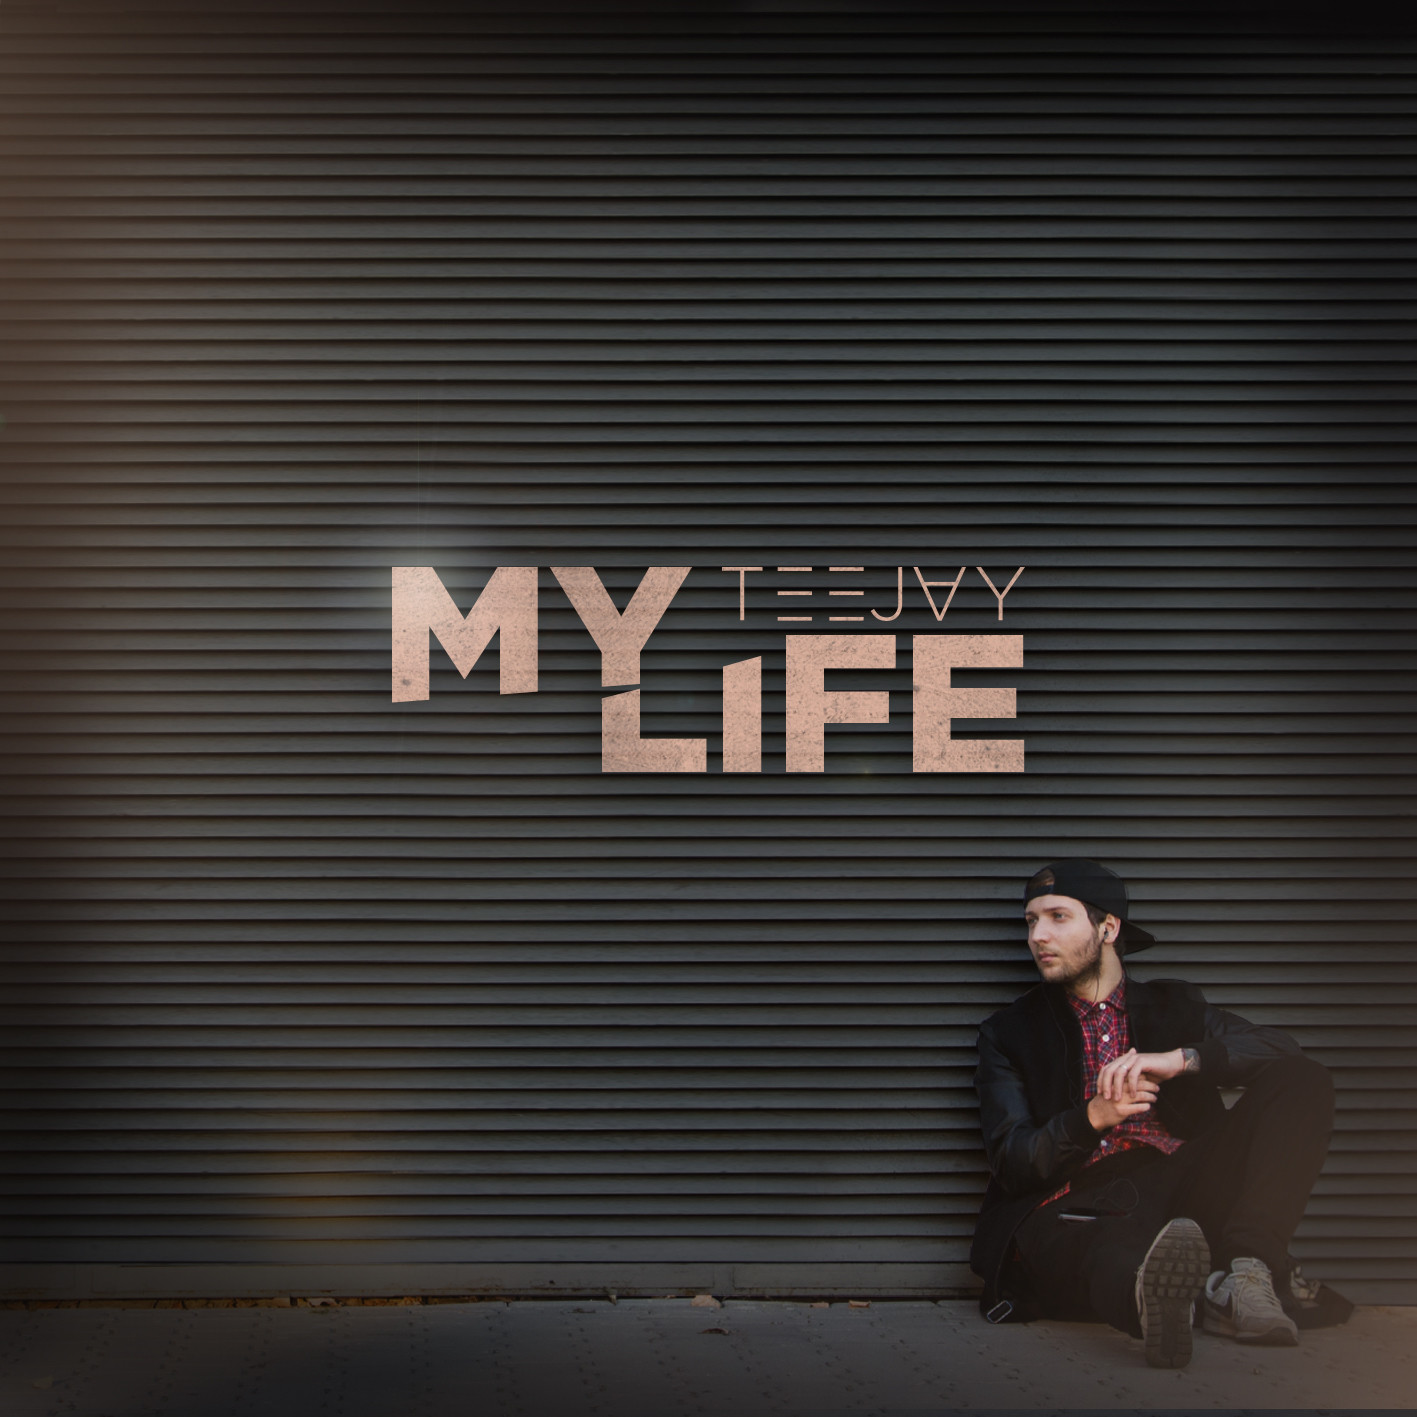 You are my life now. My Life. My Life фото. All my Life новый трек. My Music my Life.